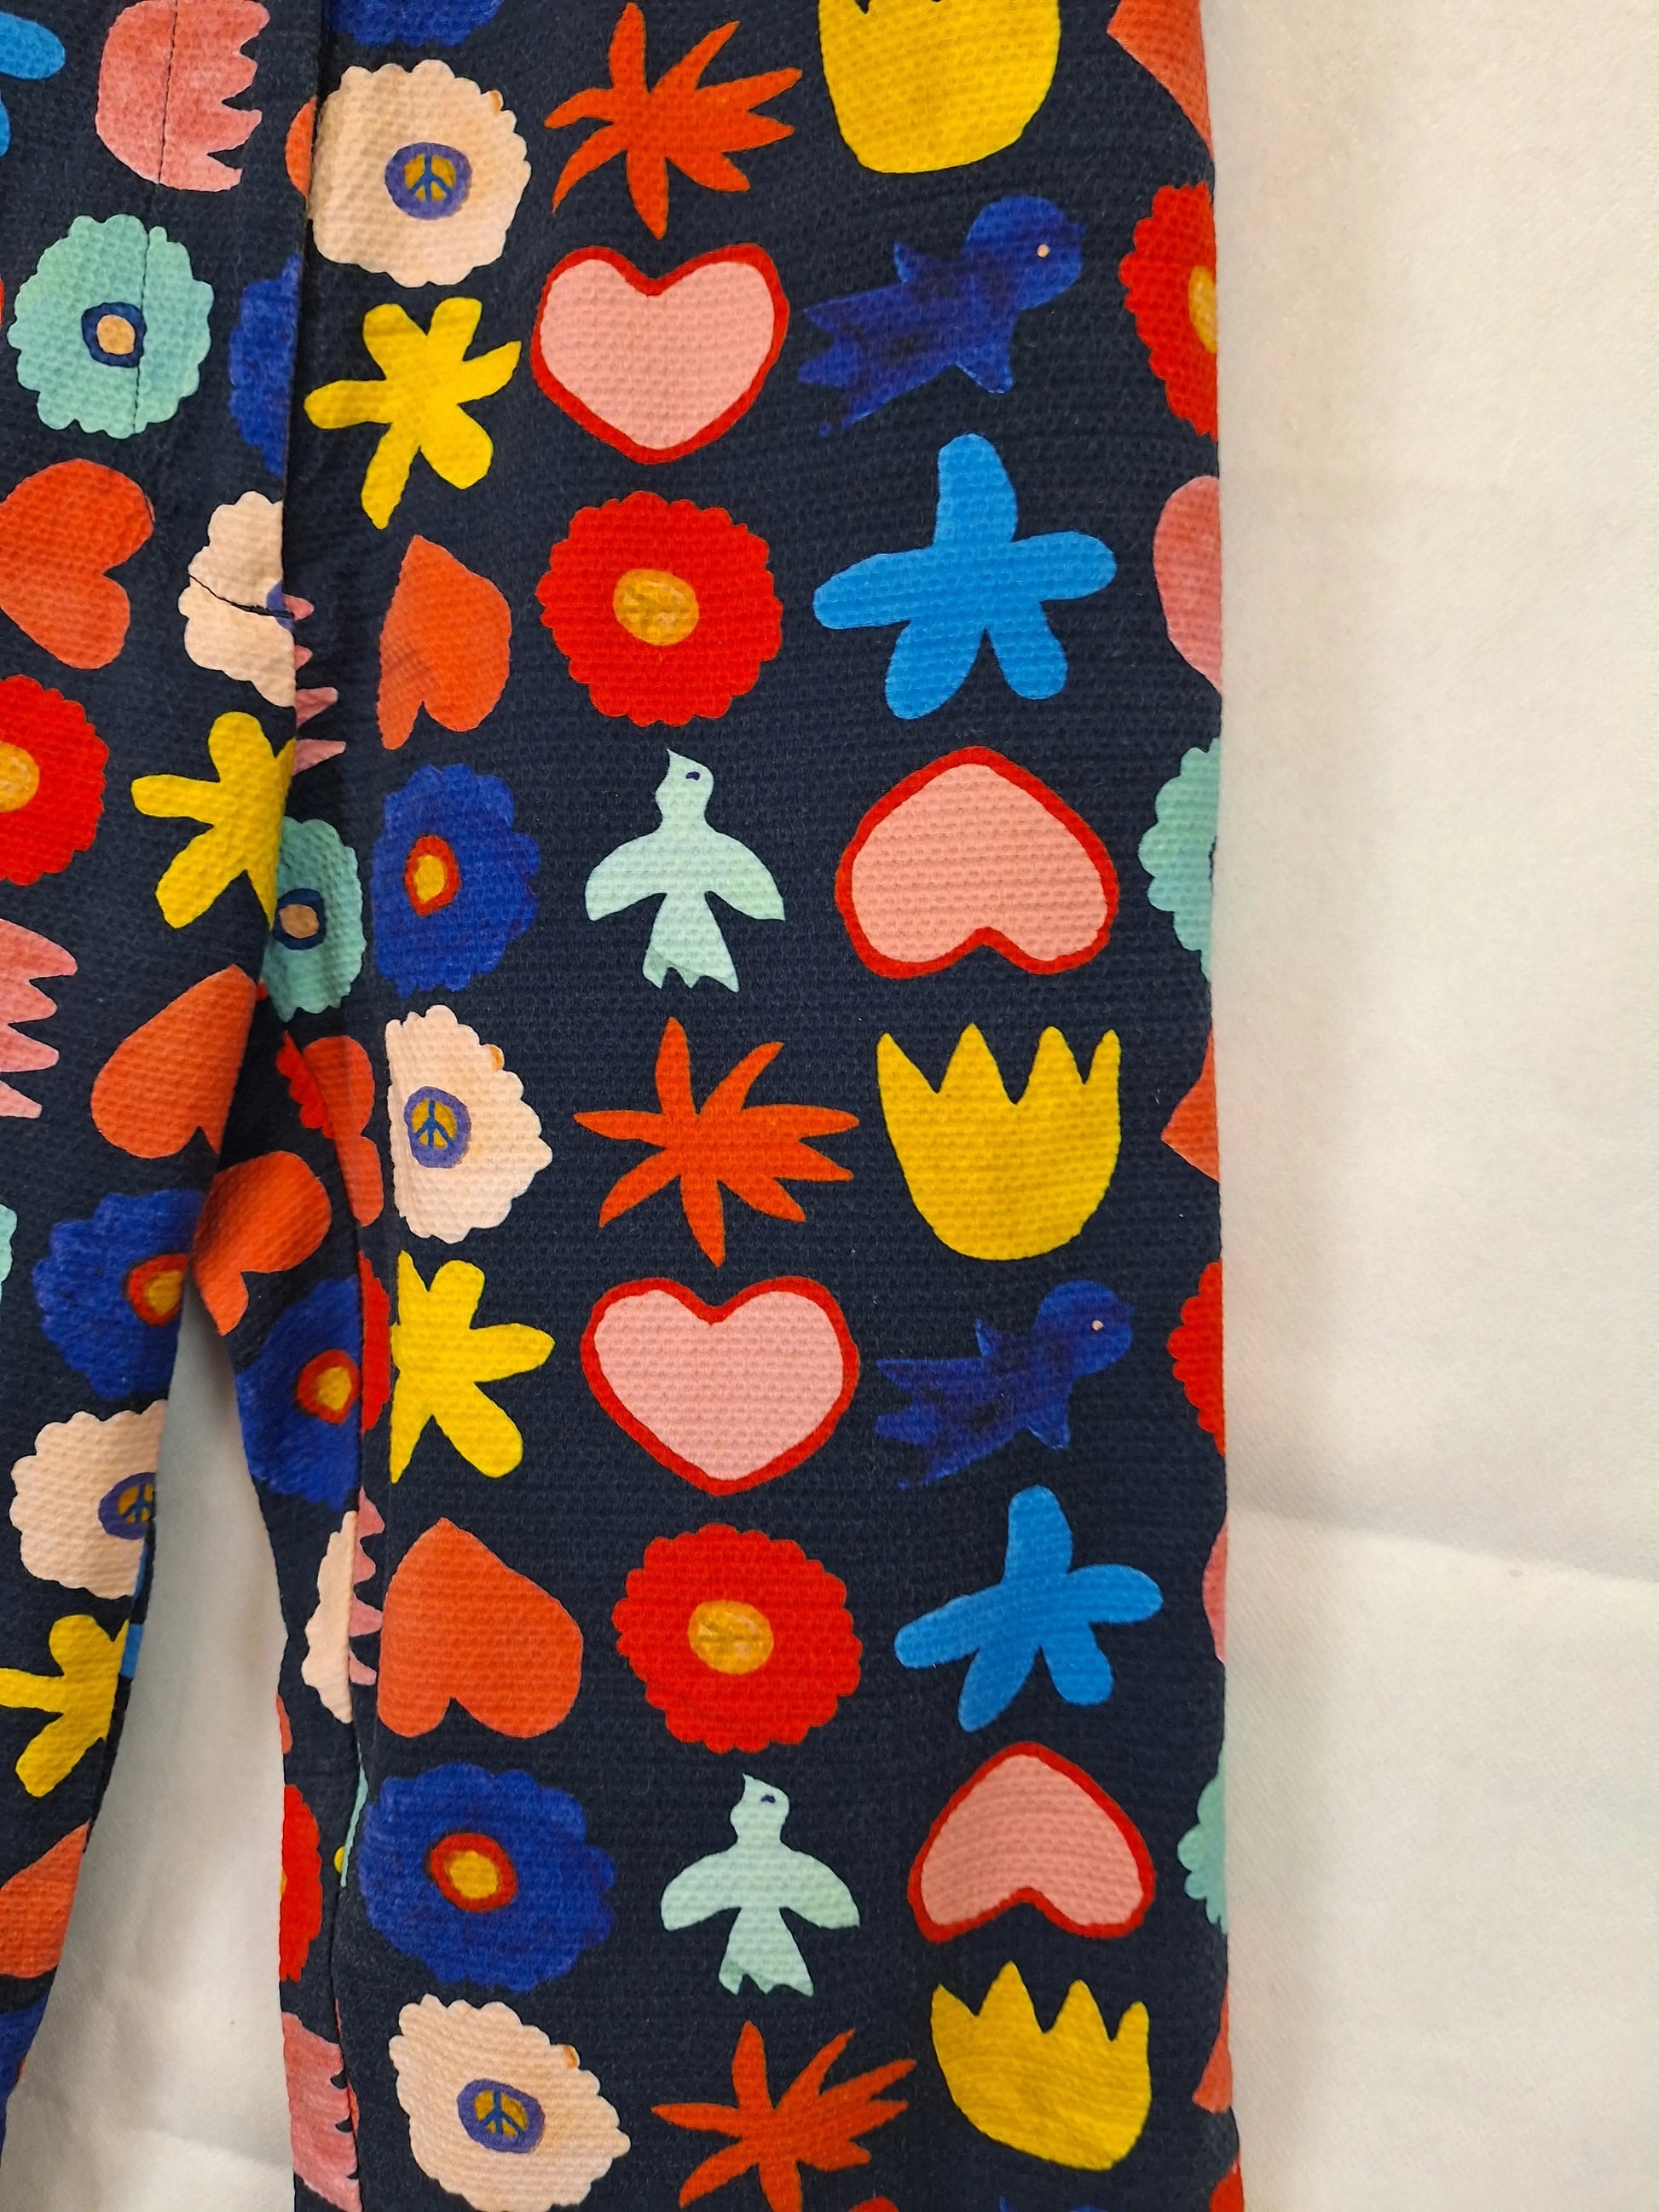 Gorman Funky Straight Leg Sticker Print Pants Size 6 by SwapUp-Online Second Hand Store-Online Thrift Store